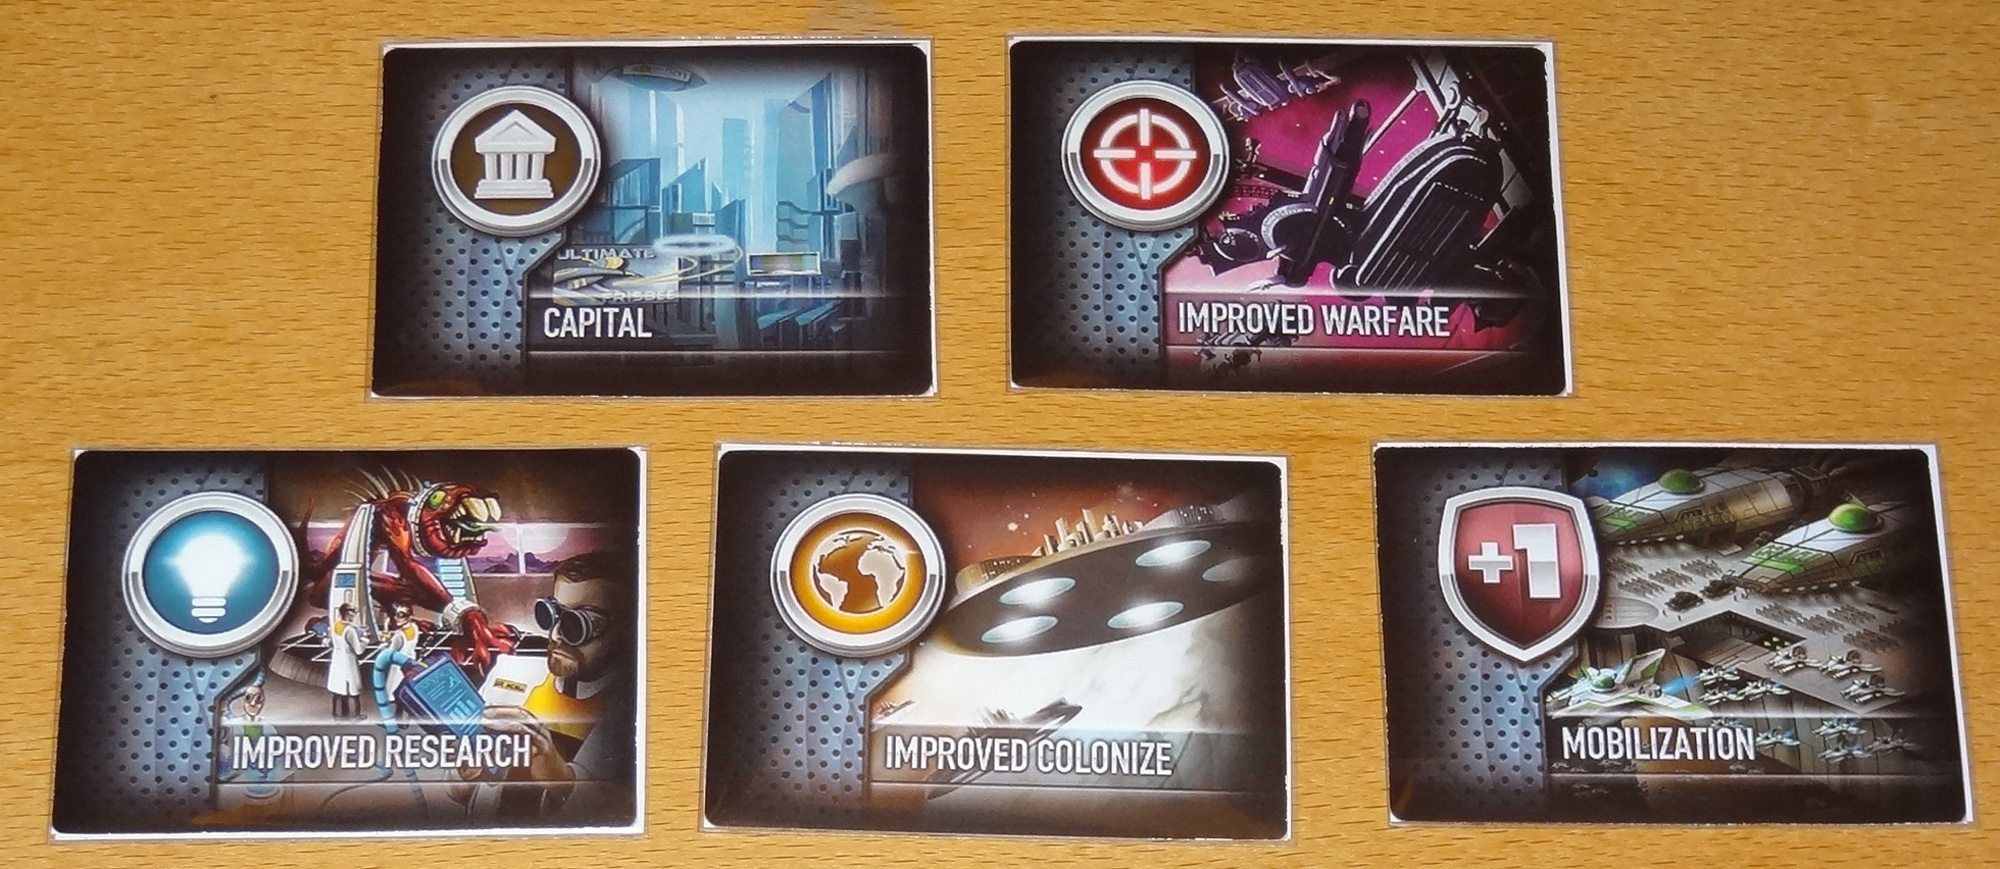 Eminent Domain Microcosm Technology cards